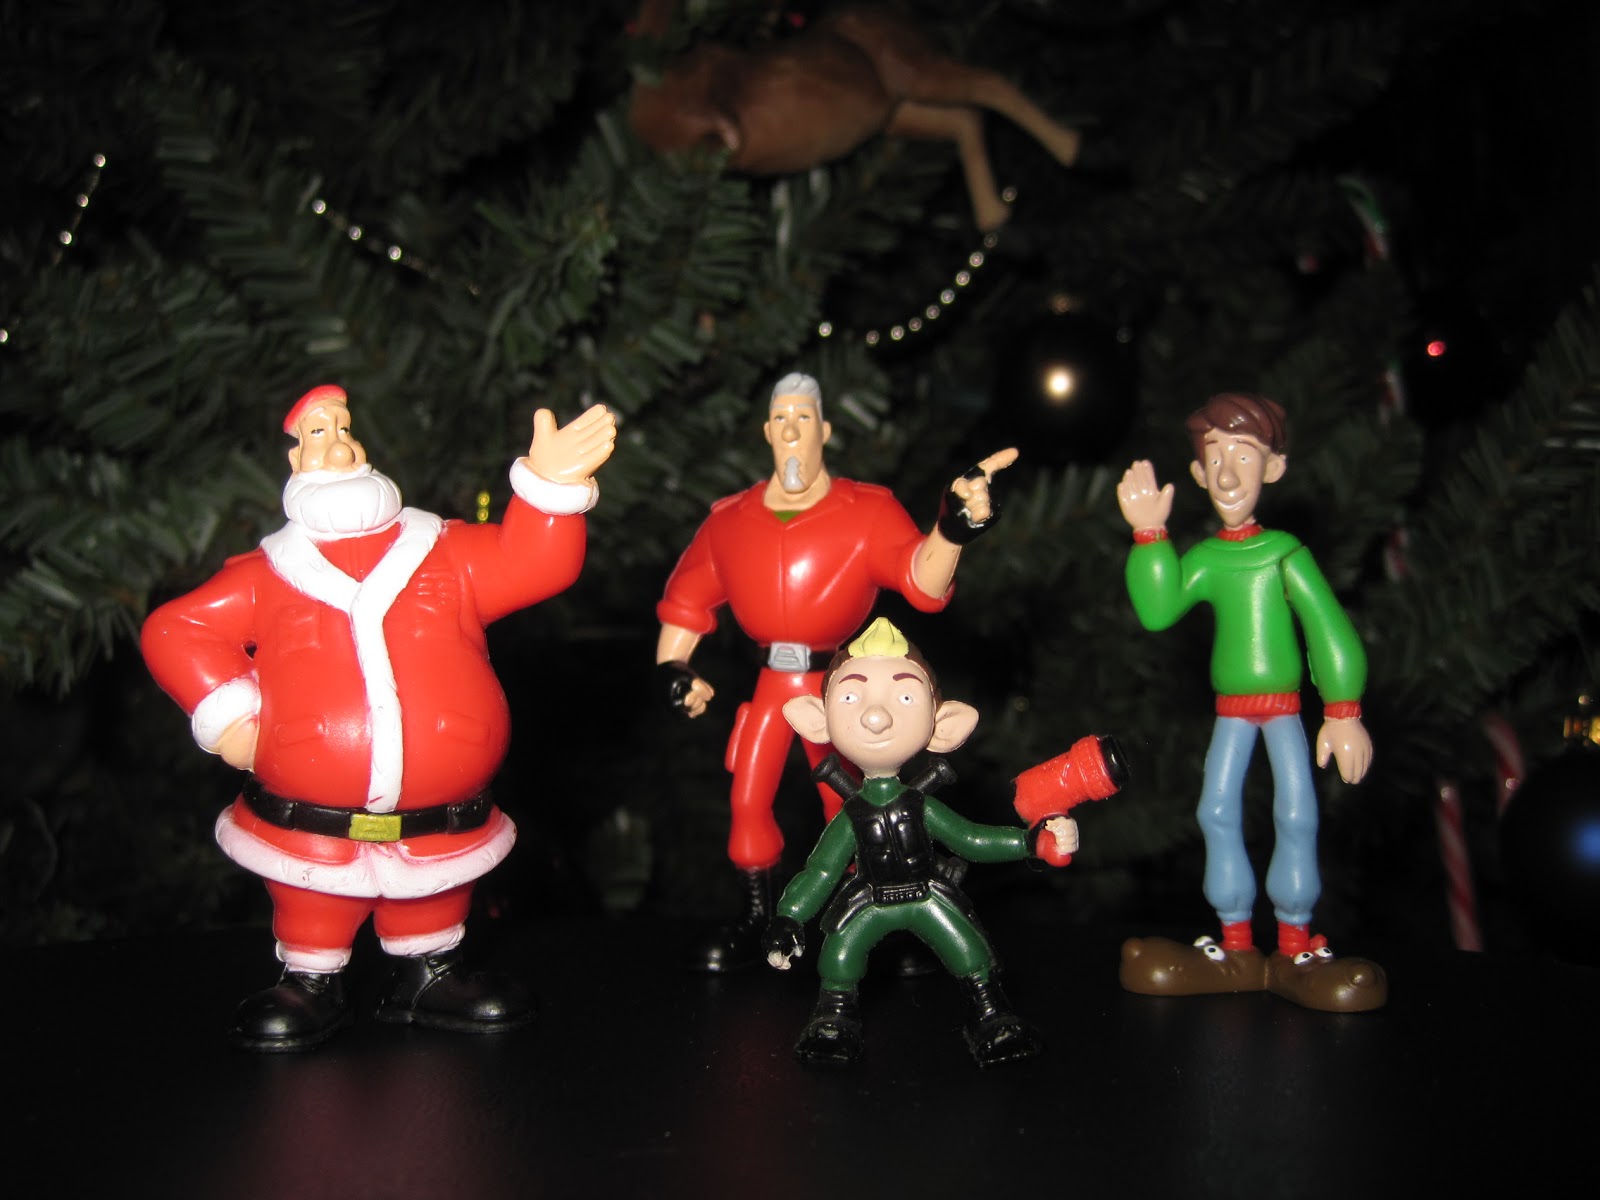 Toy Review: Arthur Christmas Figures